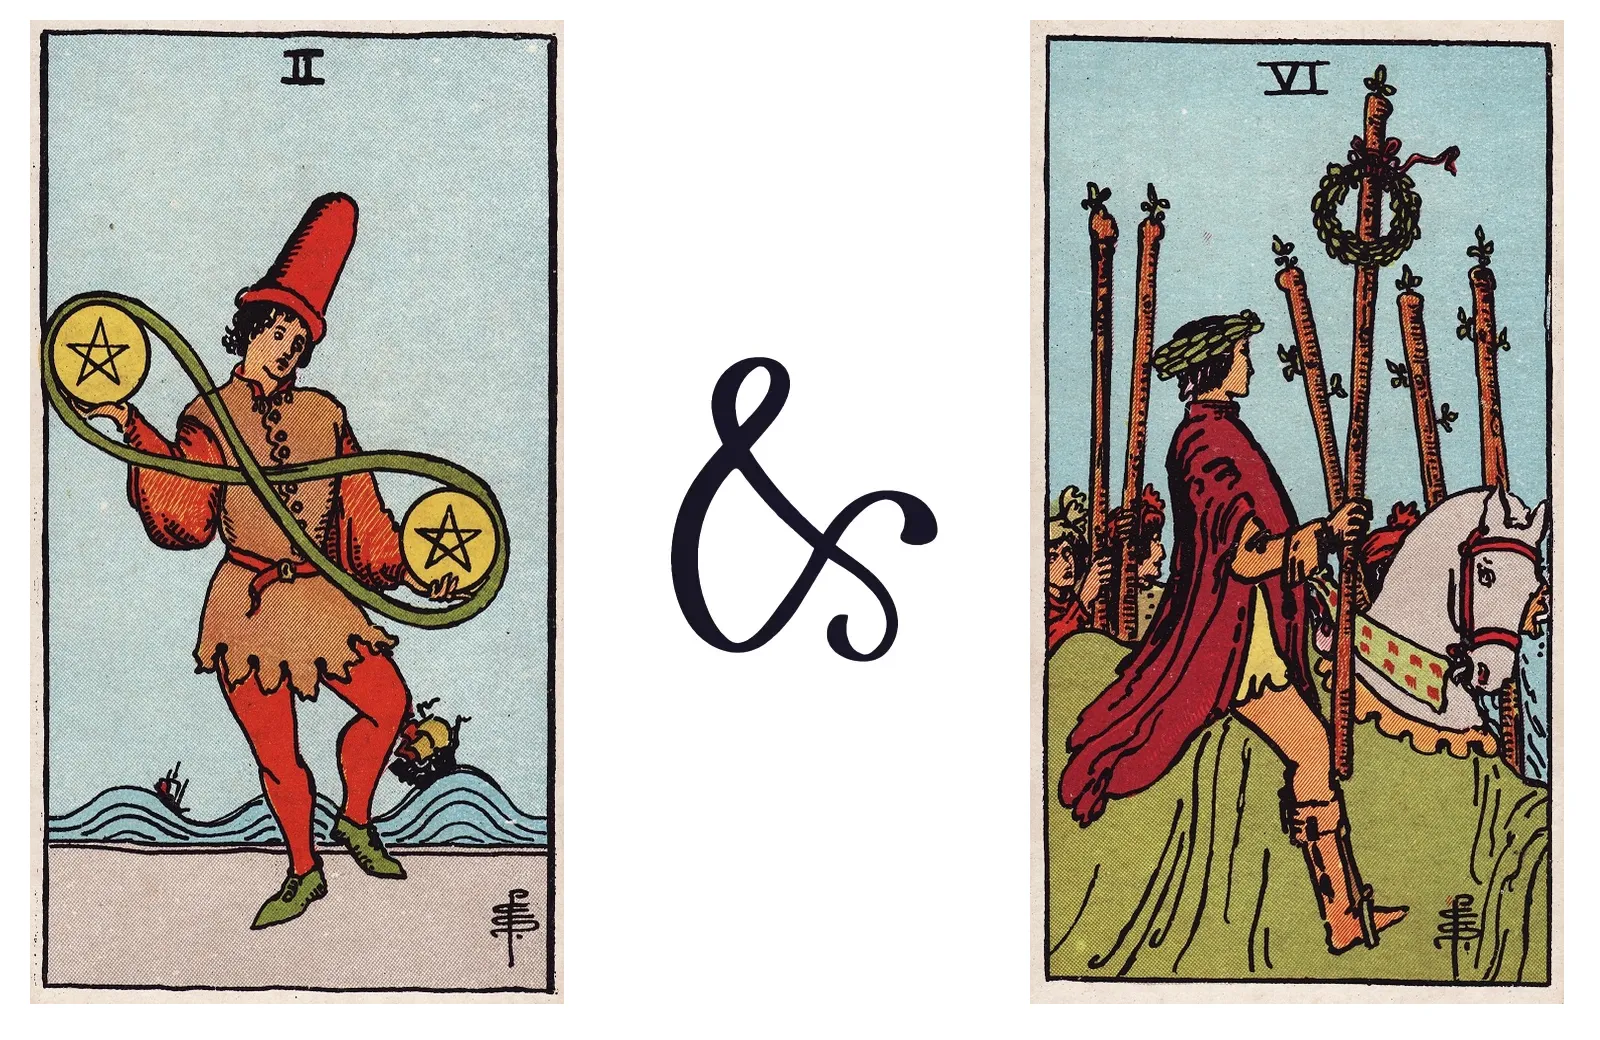 Two of Pentacles and Six of Wands